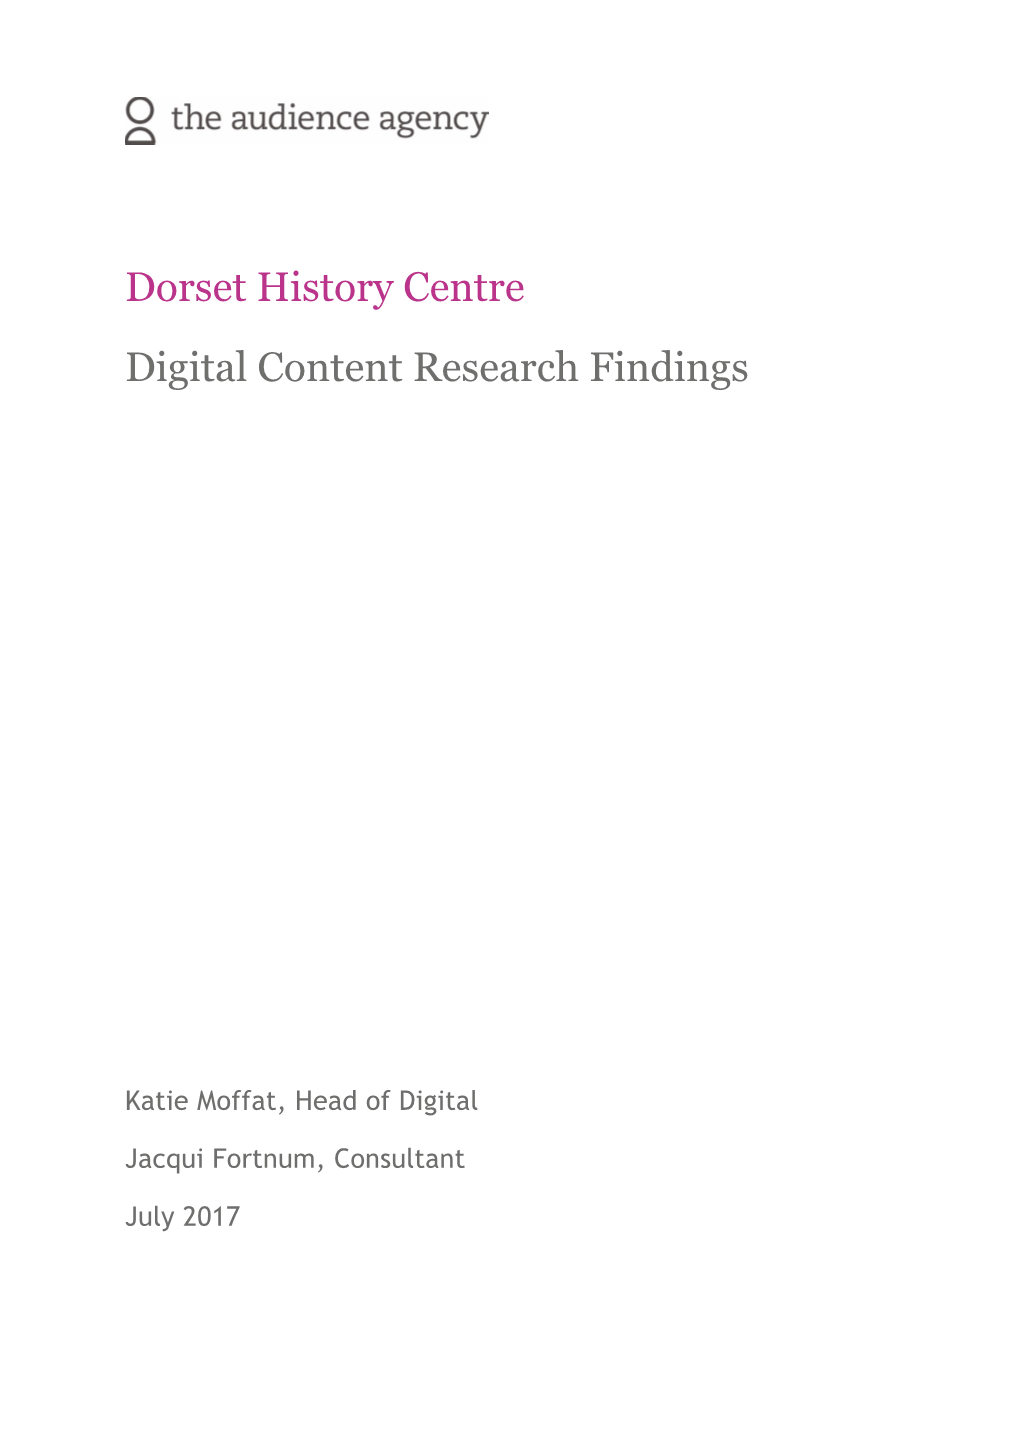 Dorset History Centre Digital Content Research Findings